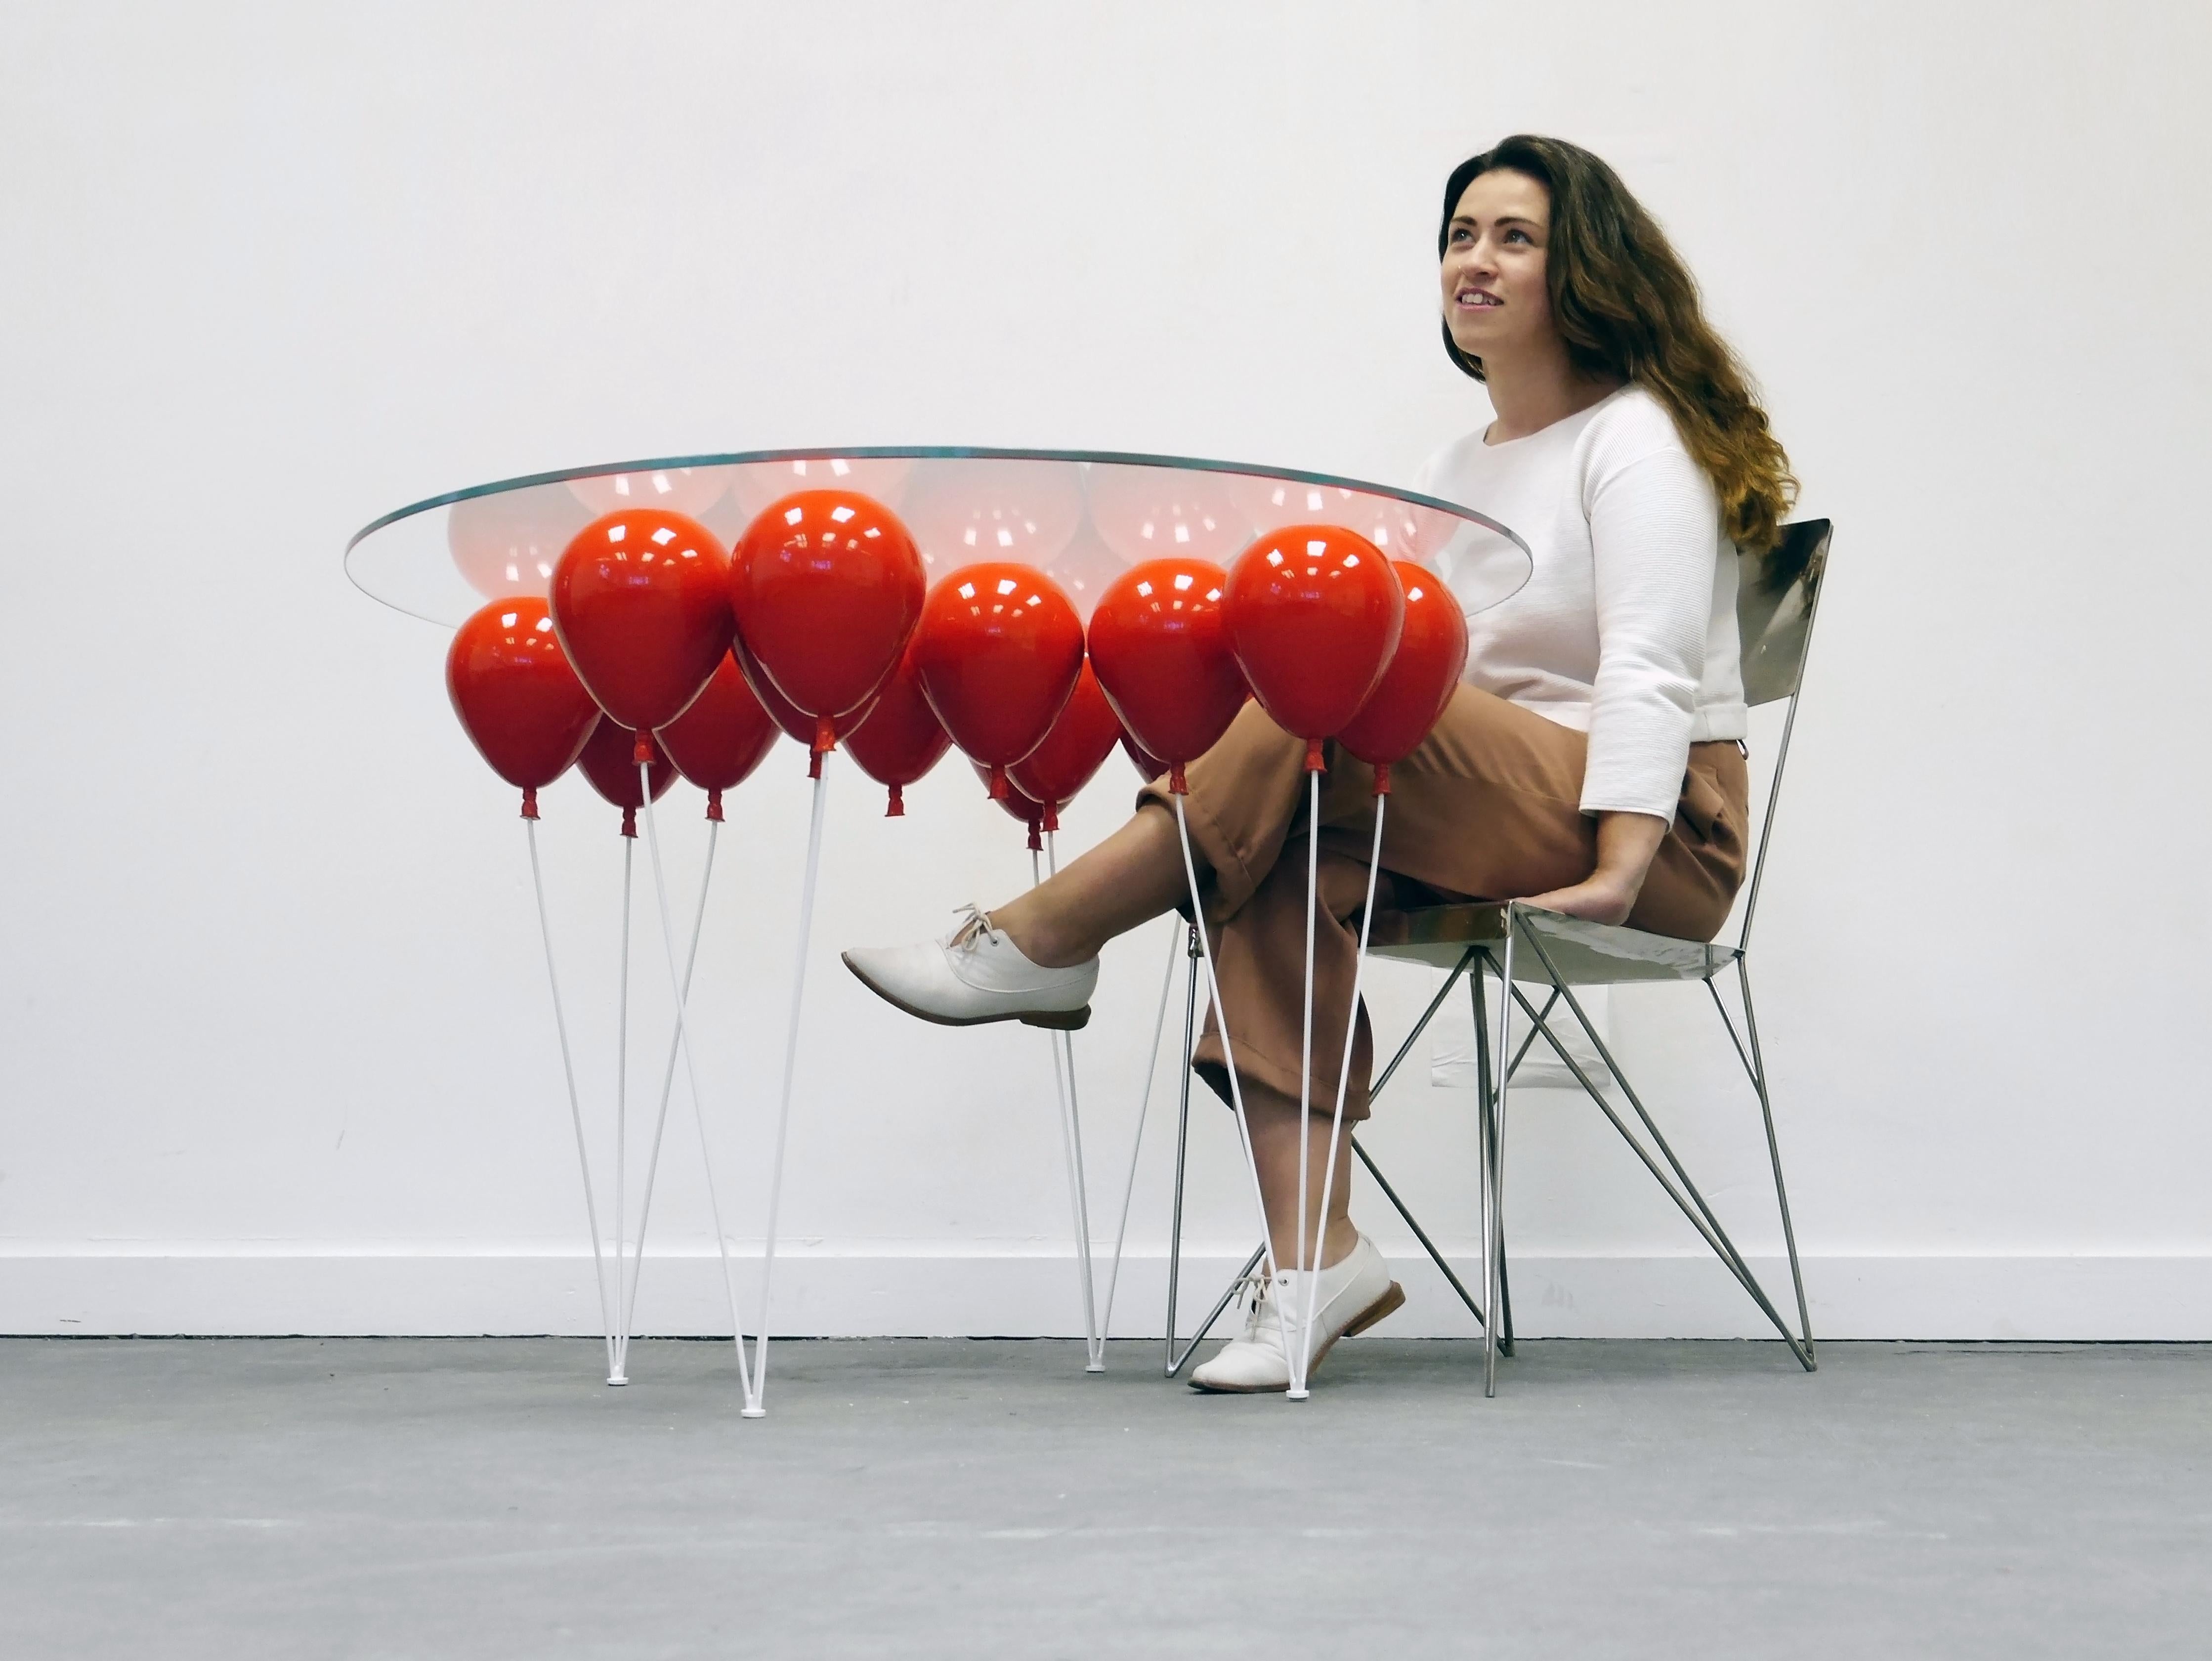 The UP balloon dining table is a playful trompe l’oeil with a series of balloons impressing the illusion of a levitating glass tabletop. 

An uplifting design from Chris Duffy that captures the imagination, playing on the concepts of levitation